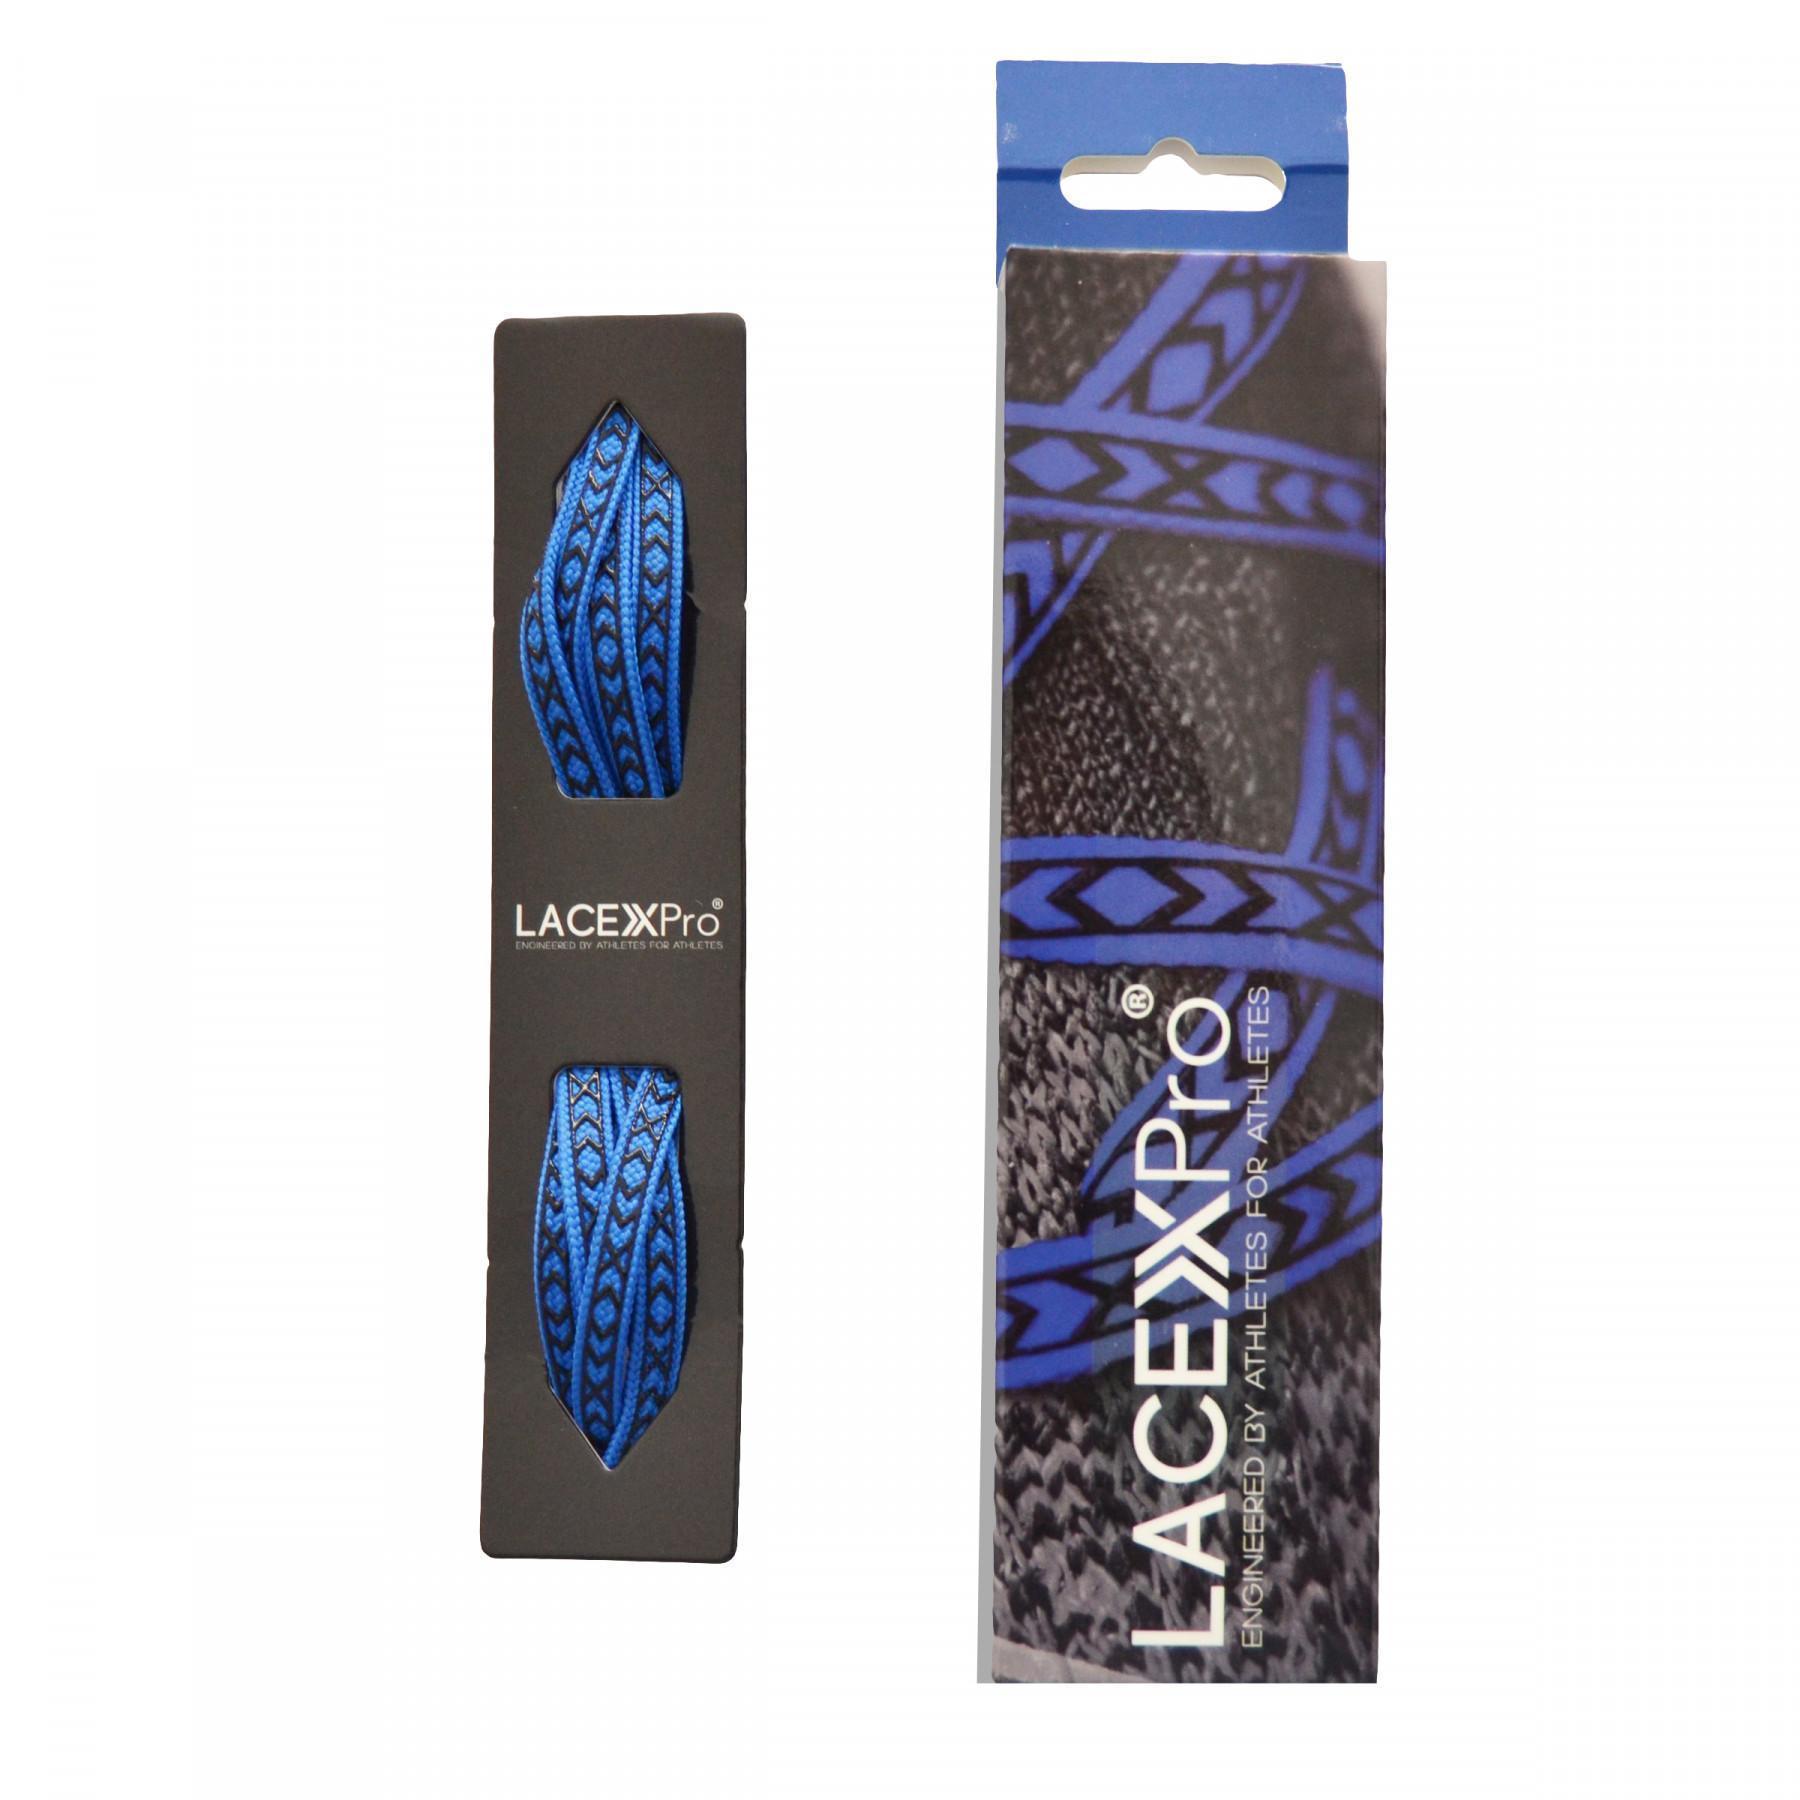 Veters Lacex Pro Grip donkerblauw